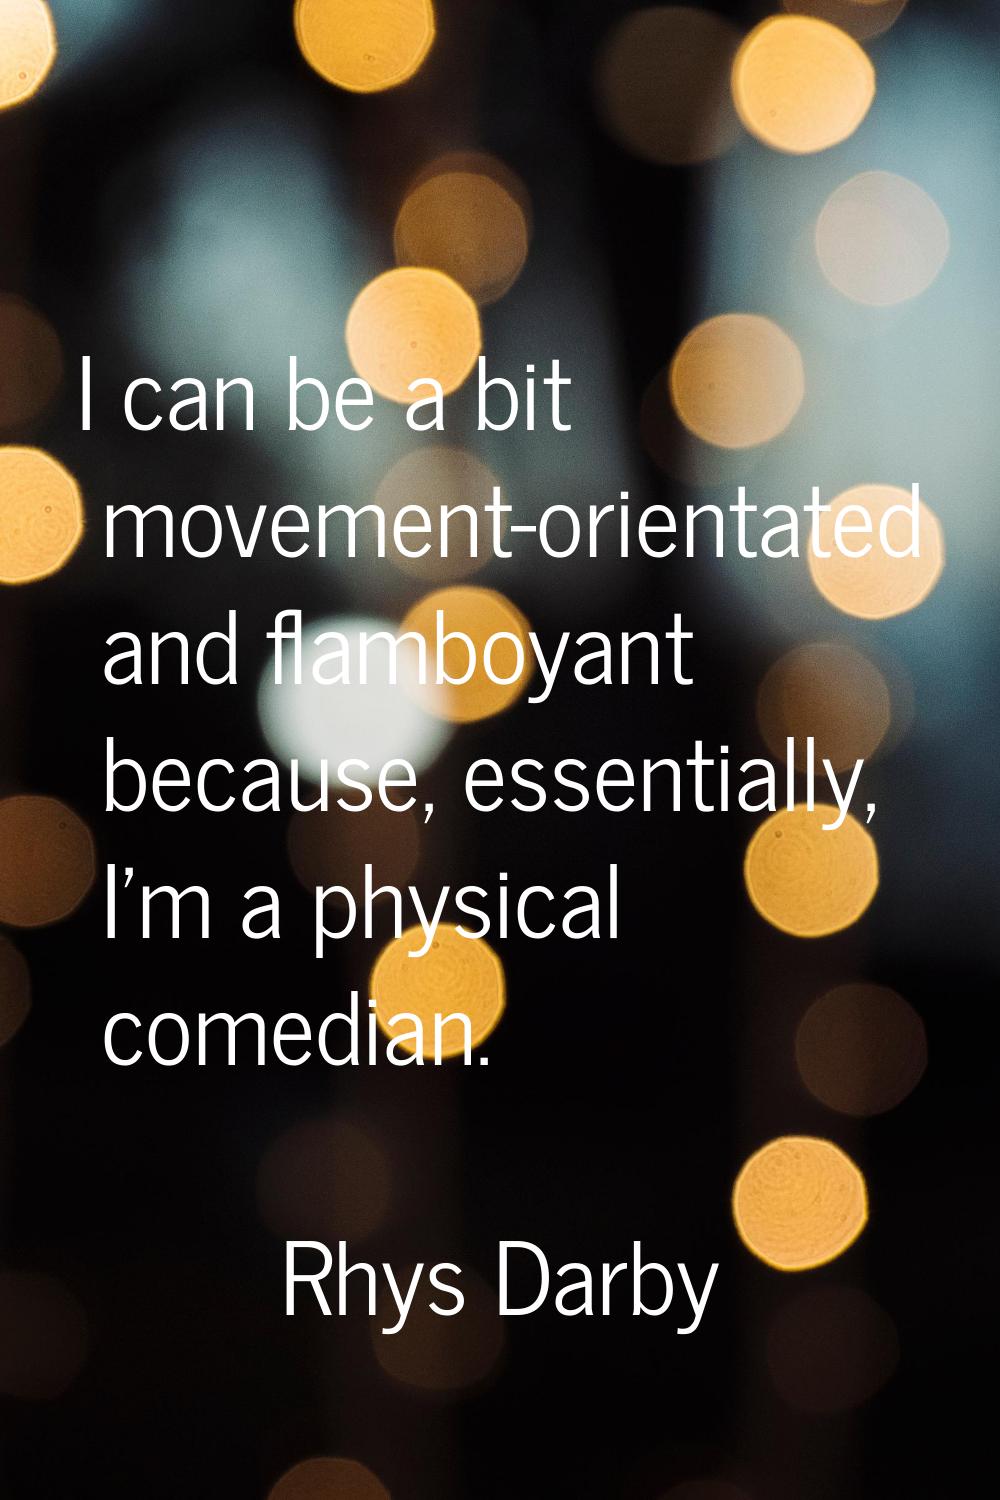 I can be a bit movement-orientated and flamboyant because, essentially, I'm a physical comedian.